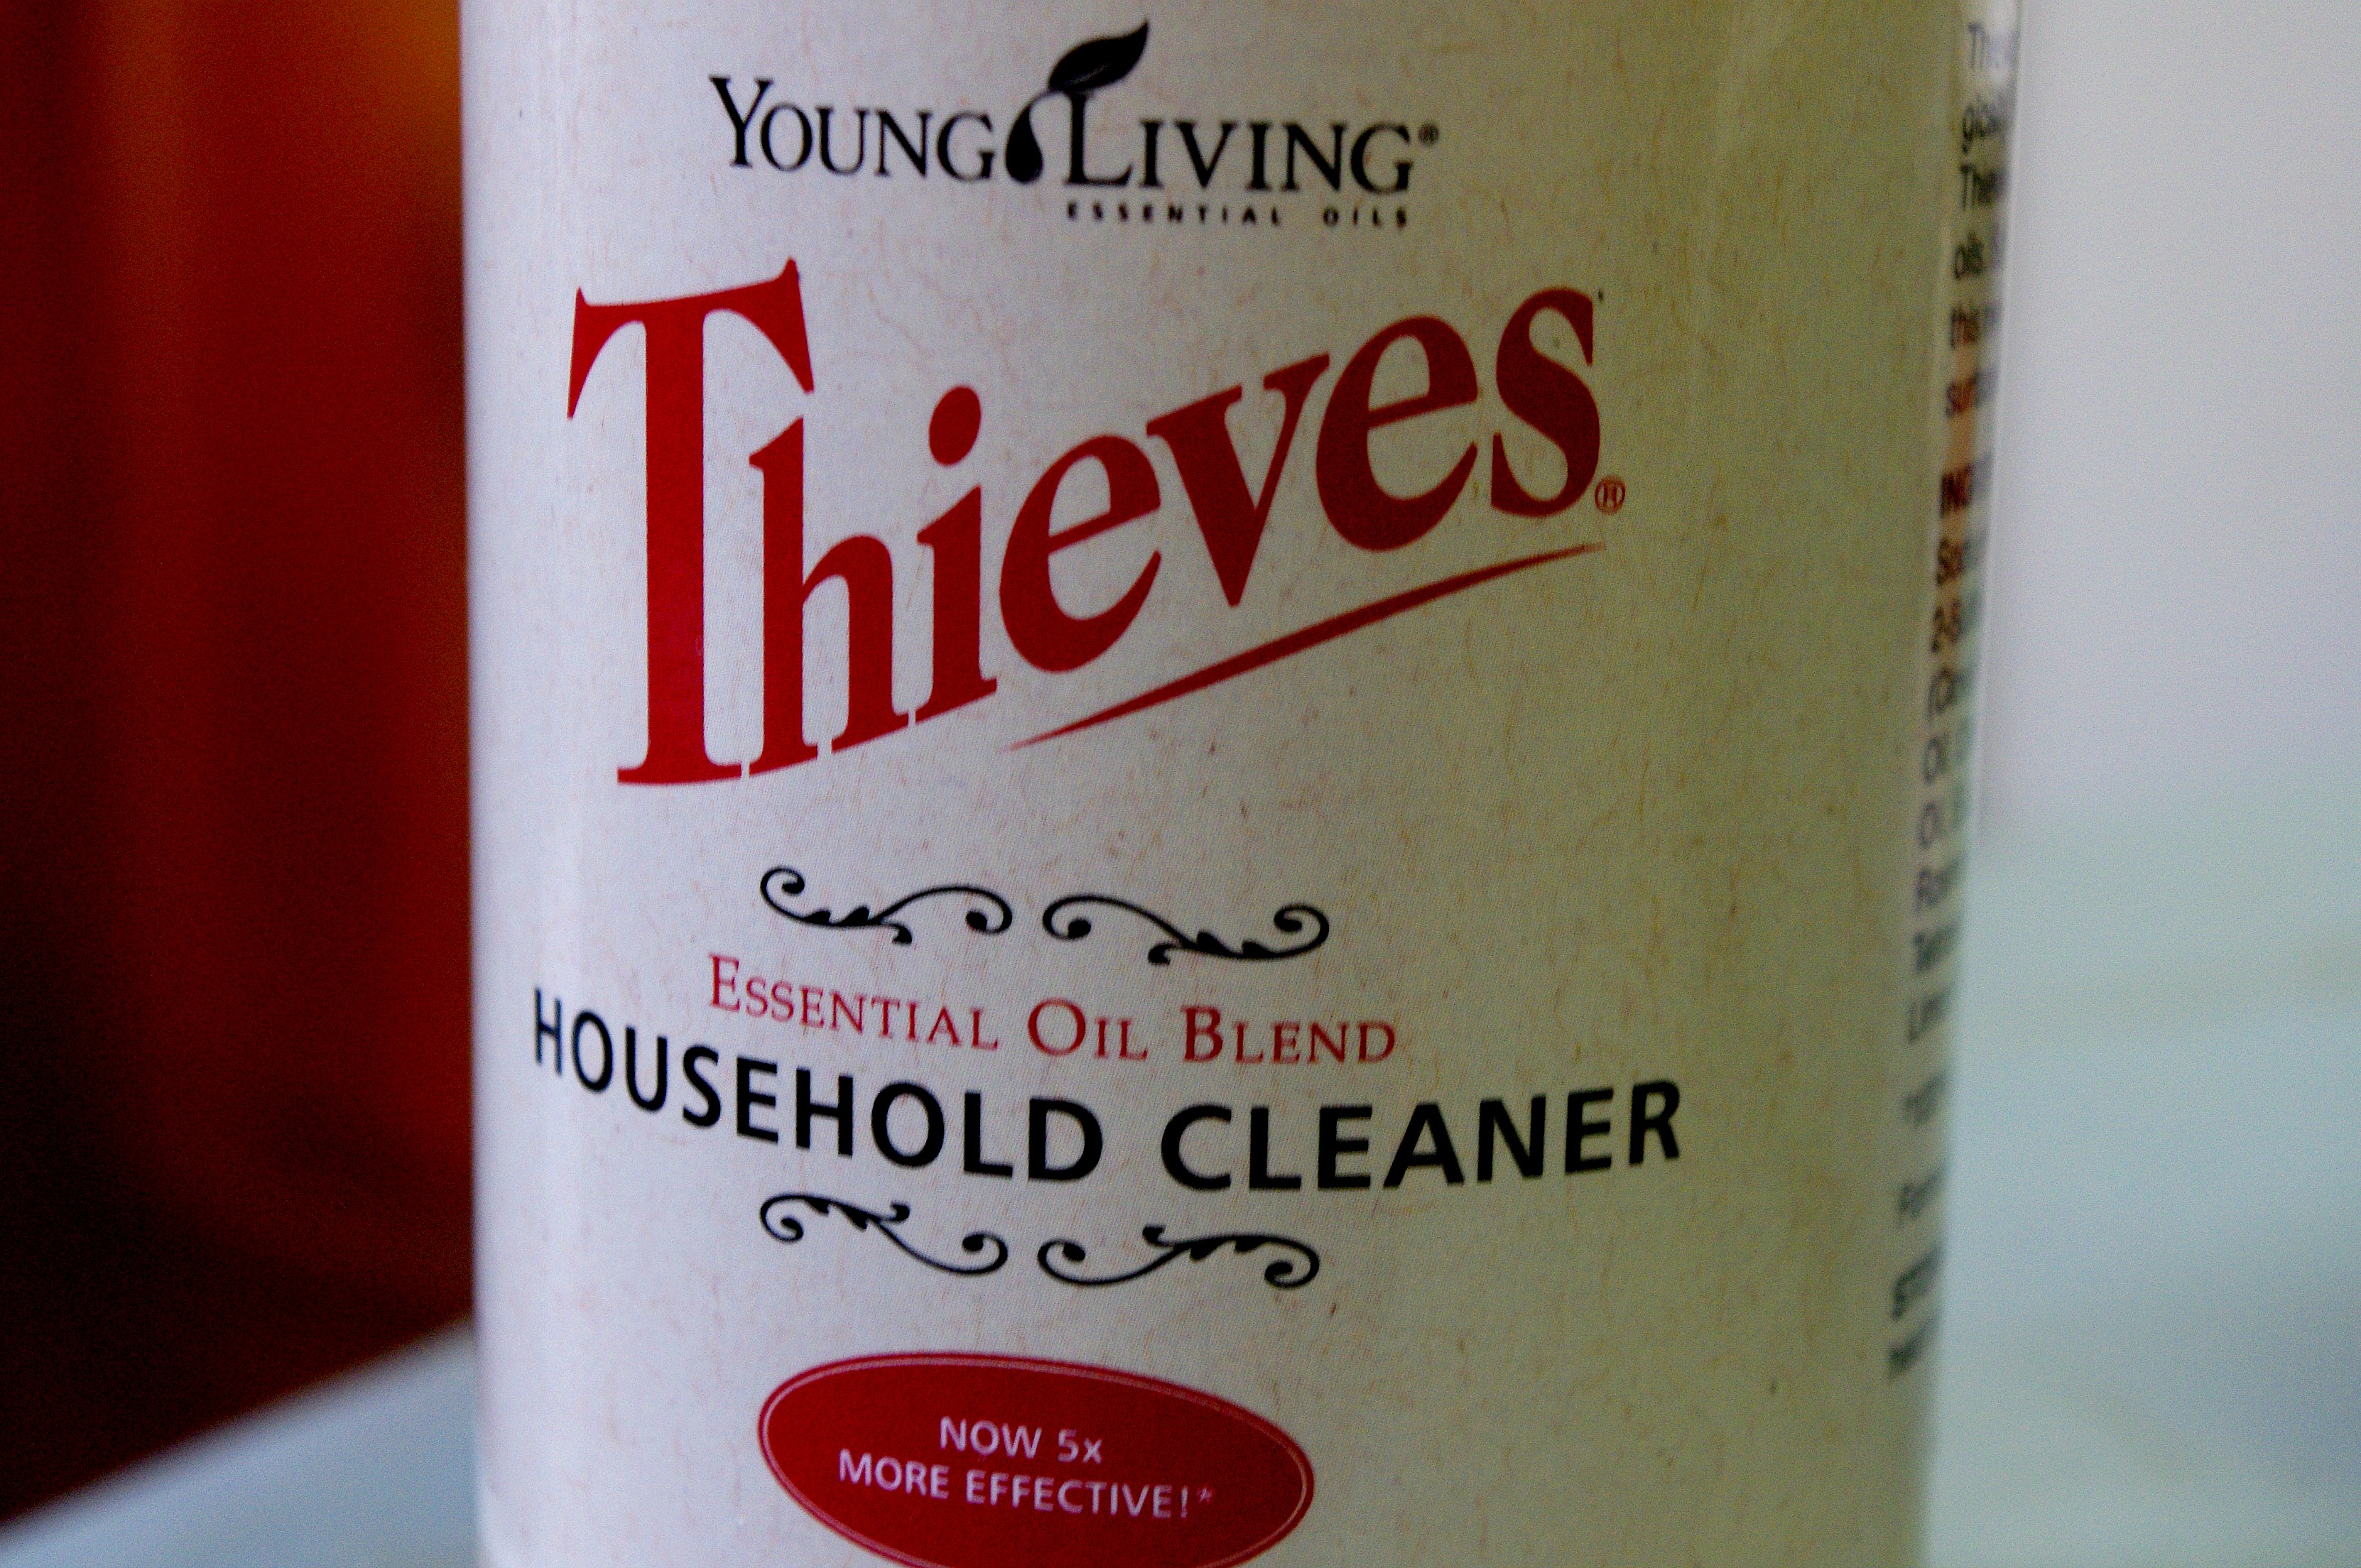 Bottle of Young Living Thieves cleaner